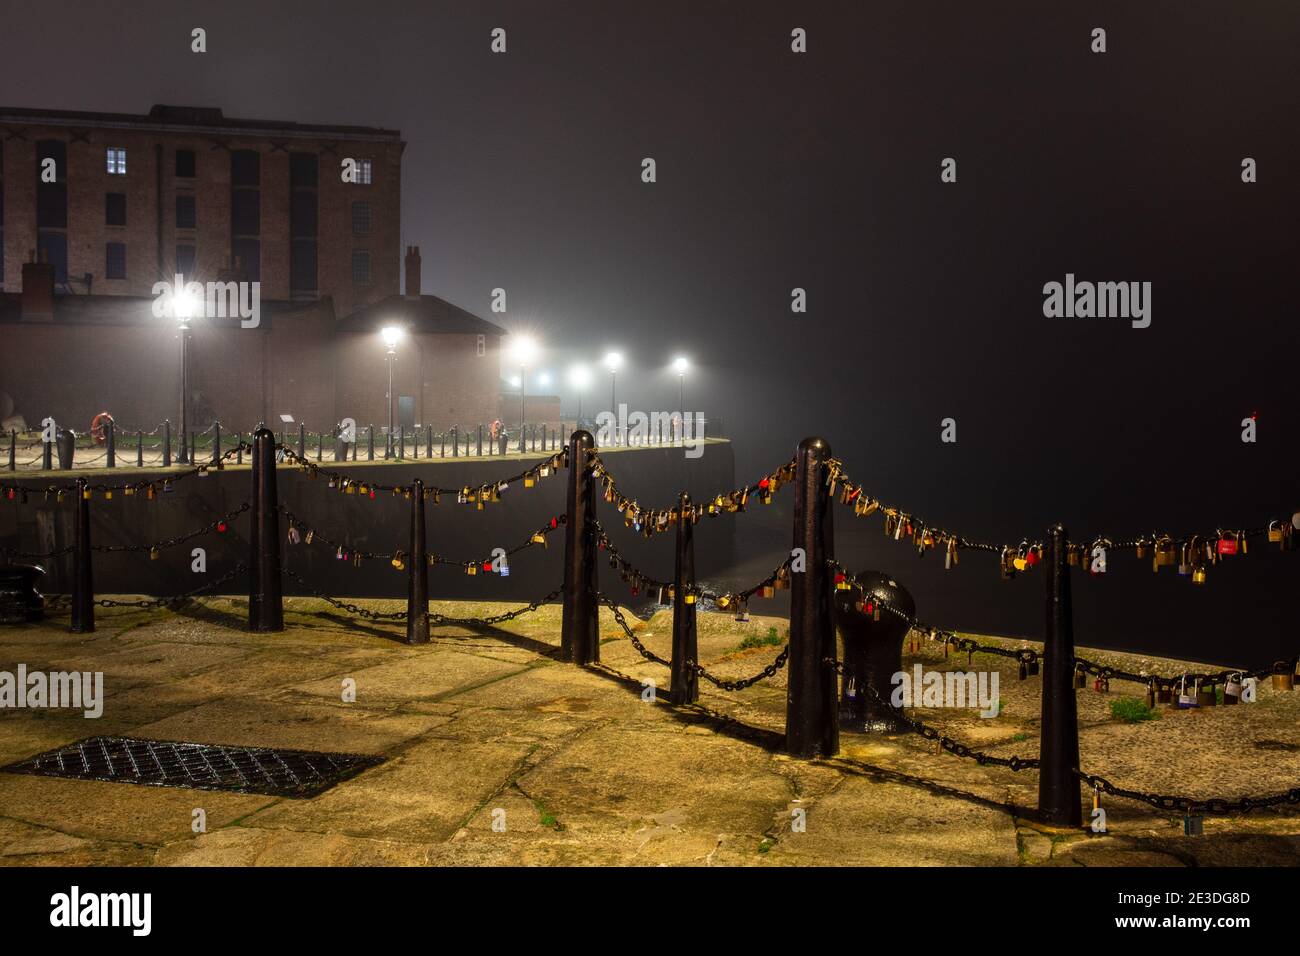 Liverpool, England, UK - November 2, 2015: Fences are covered in 'love lock' padlocks on a quayside of the River Mersey in Liverpool, with lights of B Stock Photo